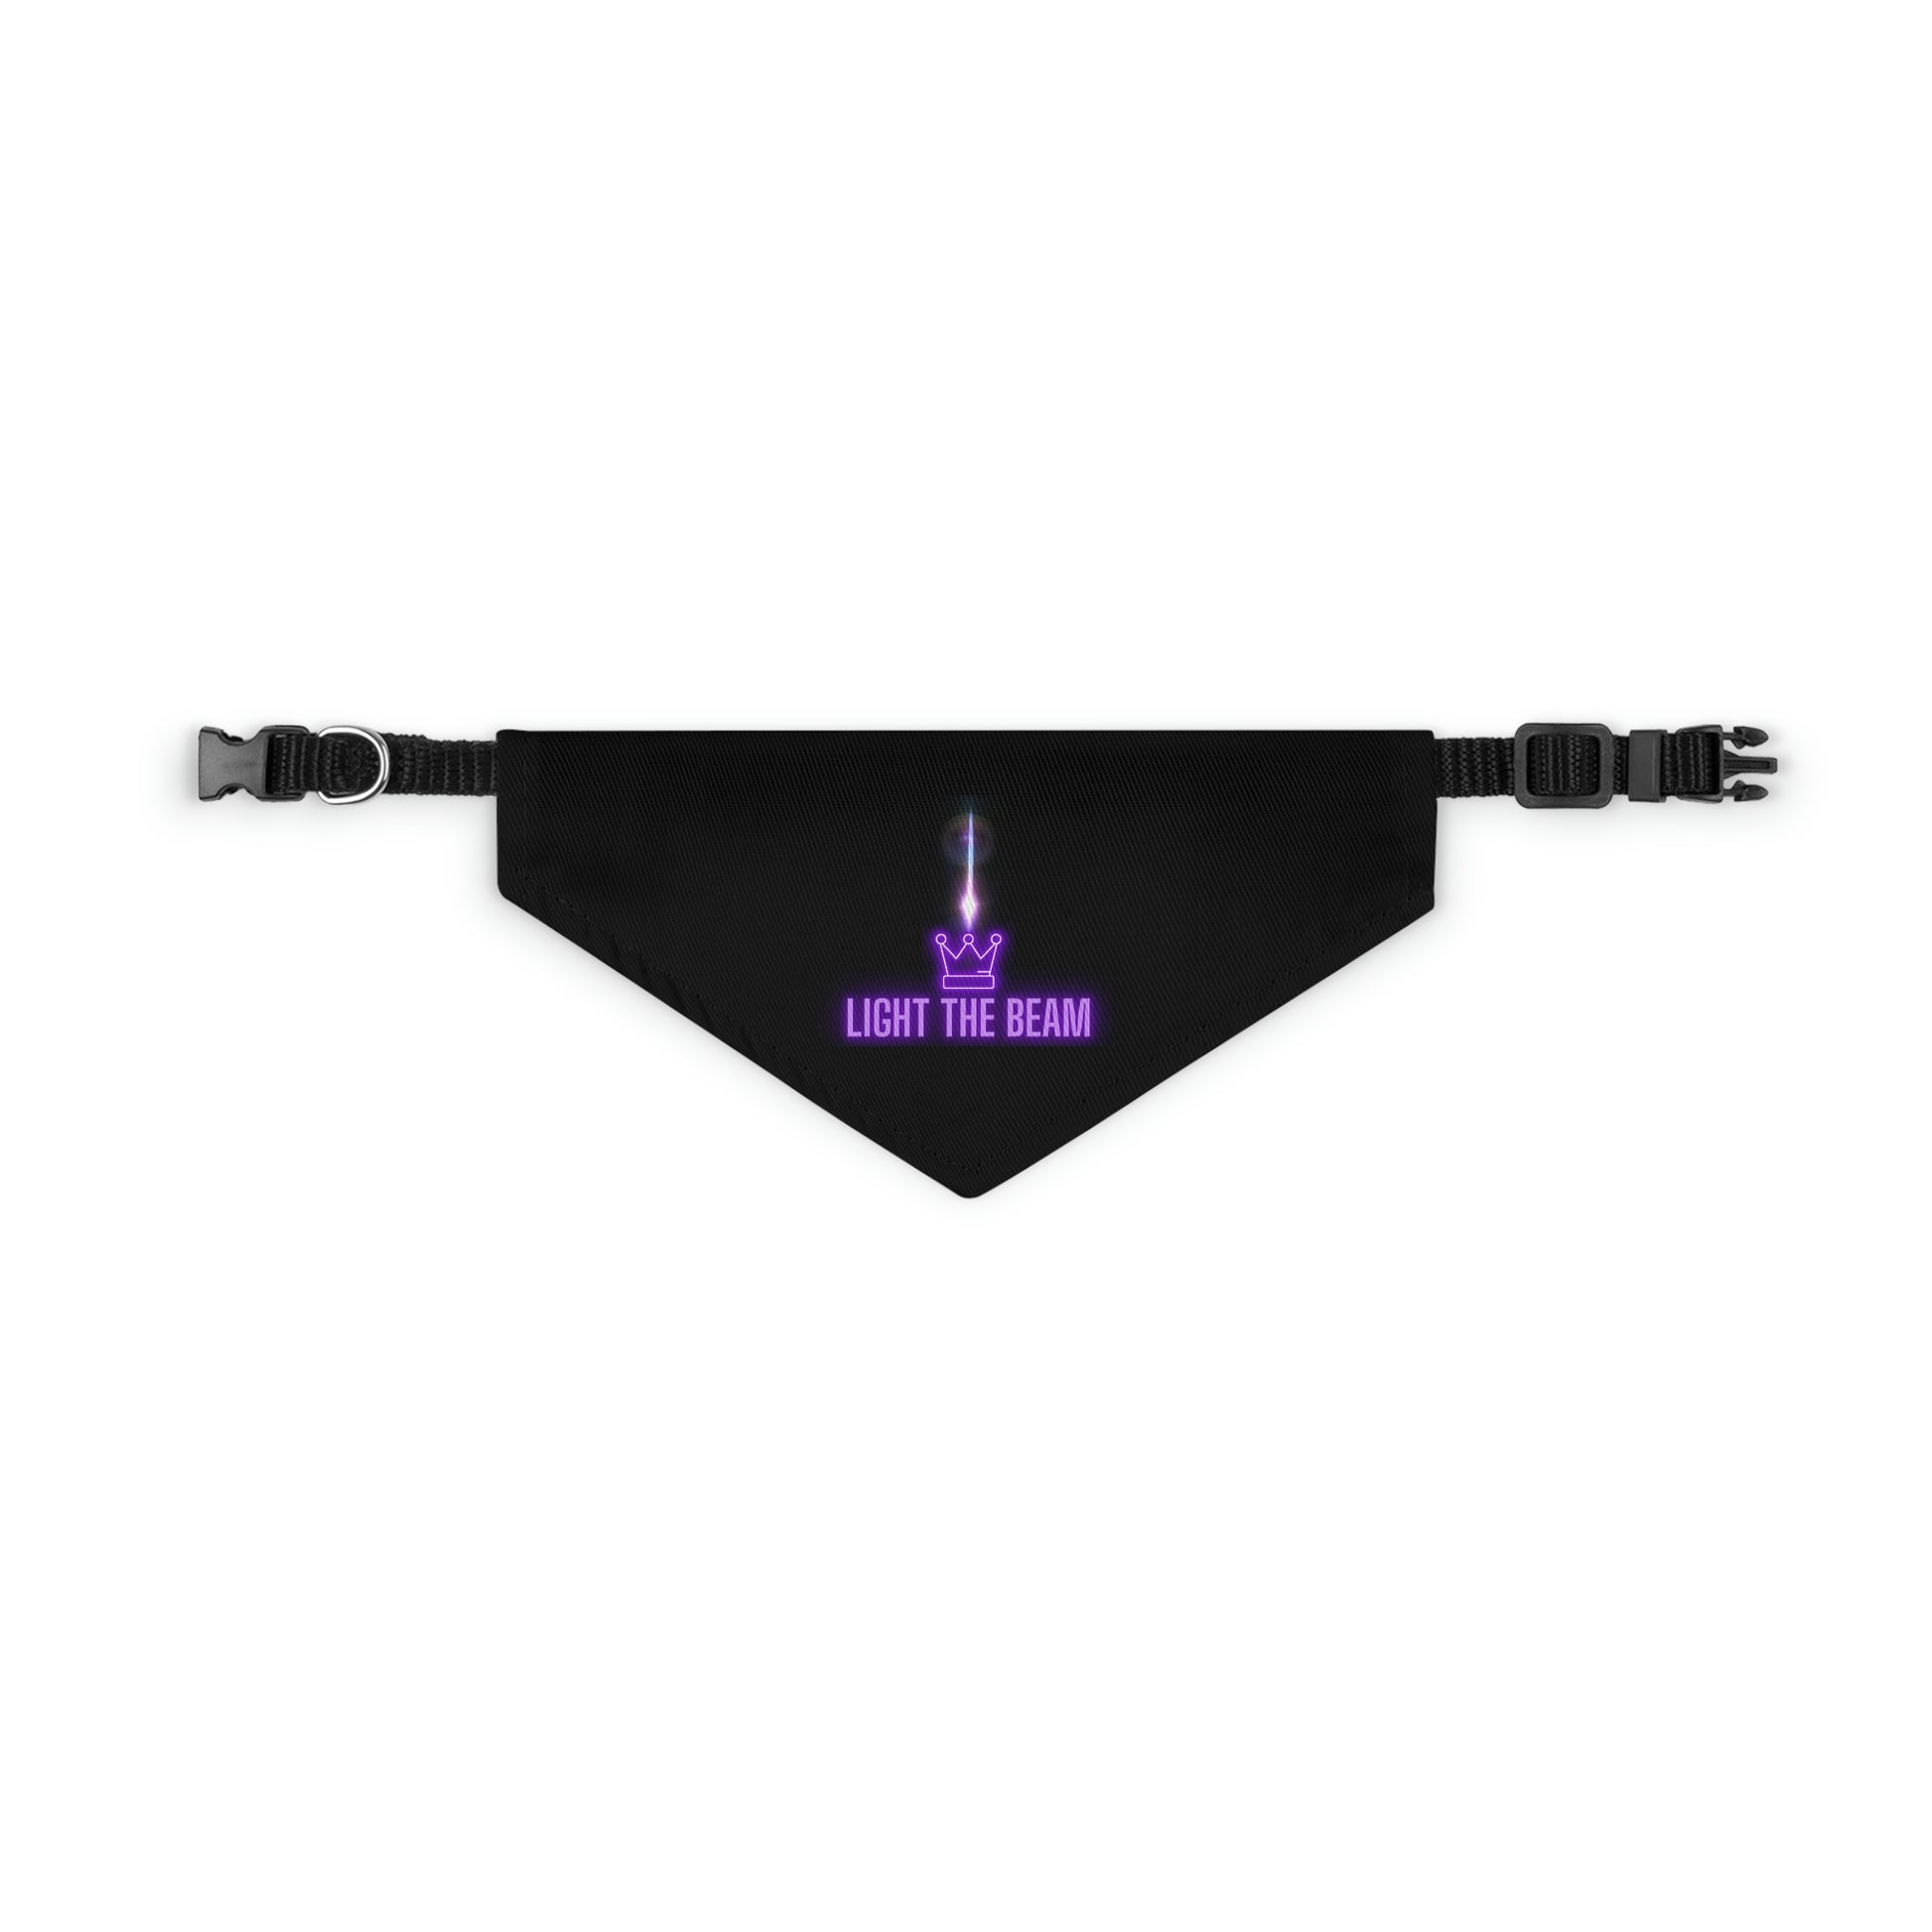 Light the Beam, Sacramento Basketball Pet Bandana Collar,Light the Beam! Celebrate another W - WIN - for your Kings Basketball team with your pet! Perfect way to show off another W on your morning walk with your Kings fan dog.